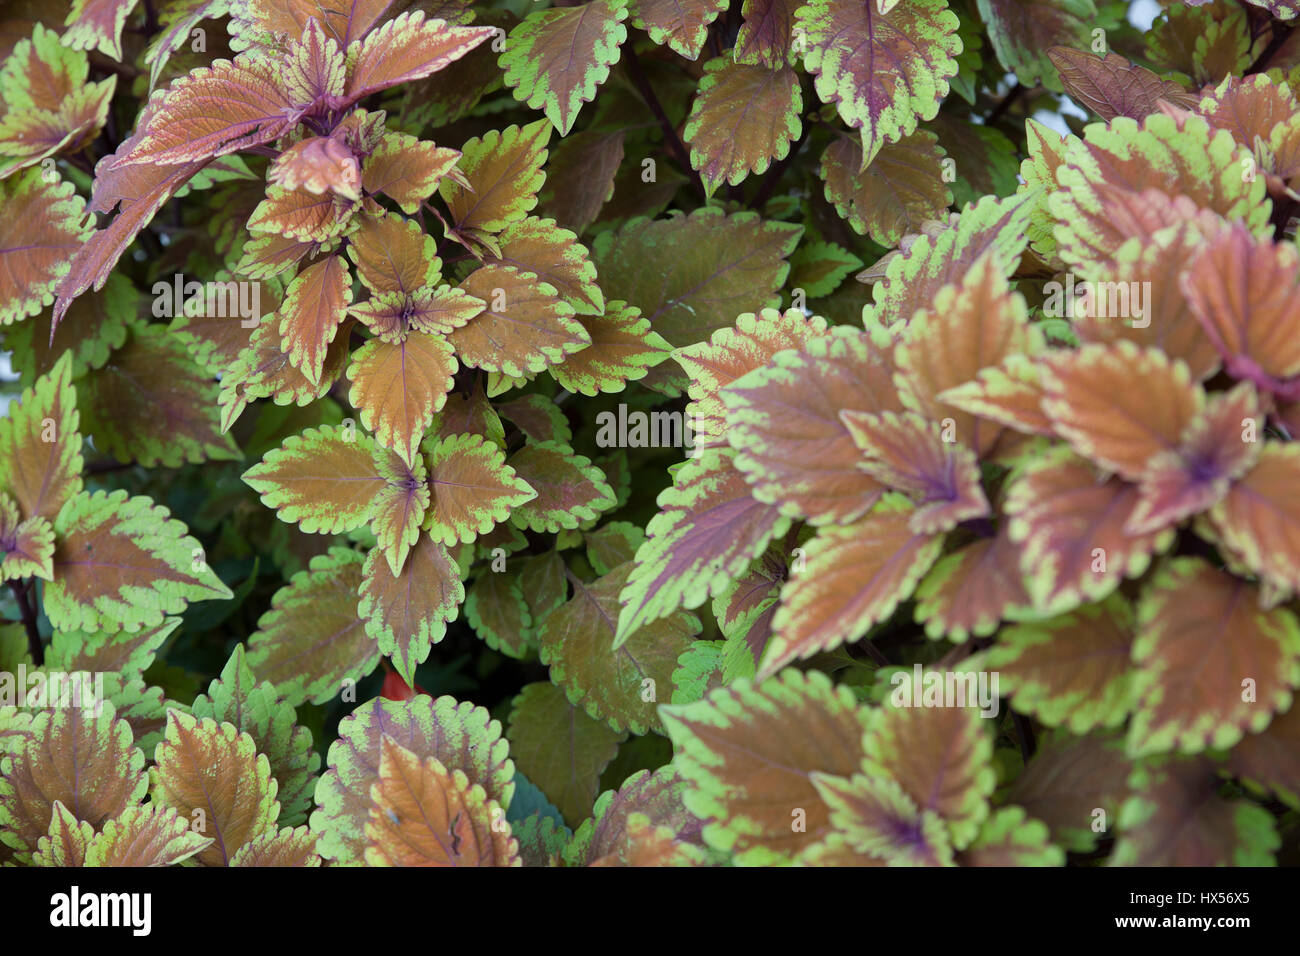 A cluster of colorful coleus plants. Stock Photo